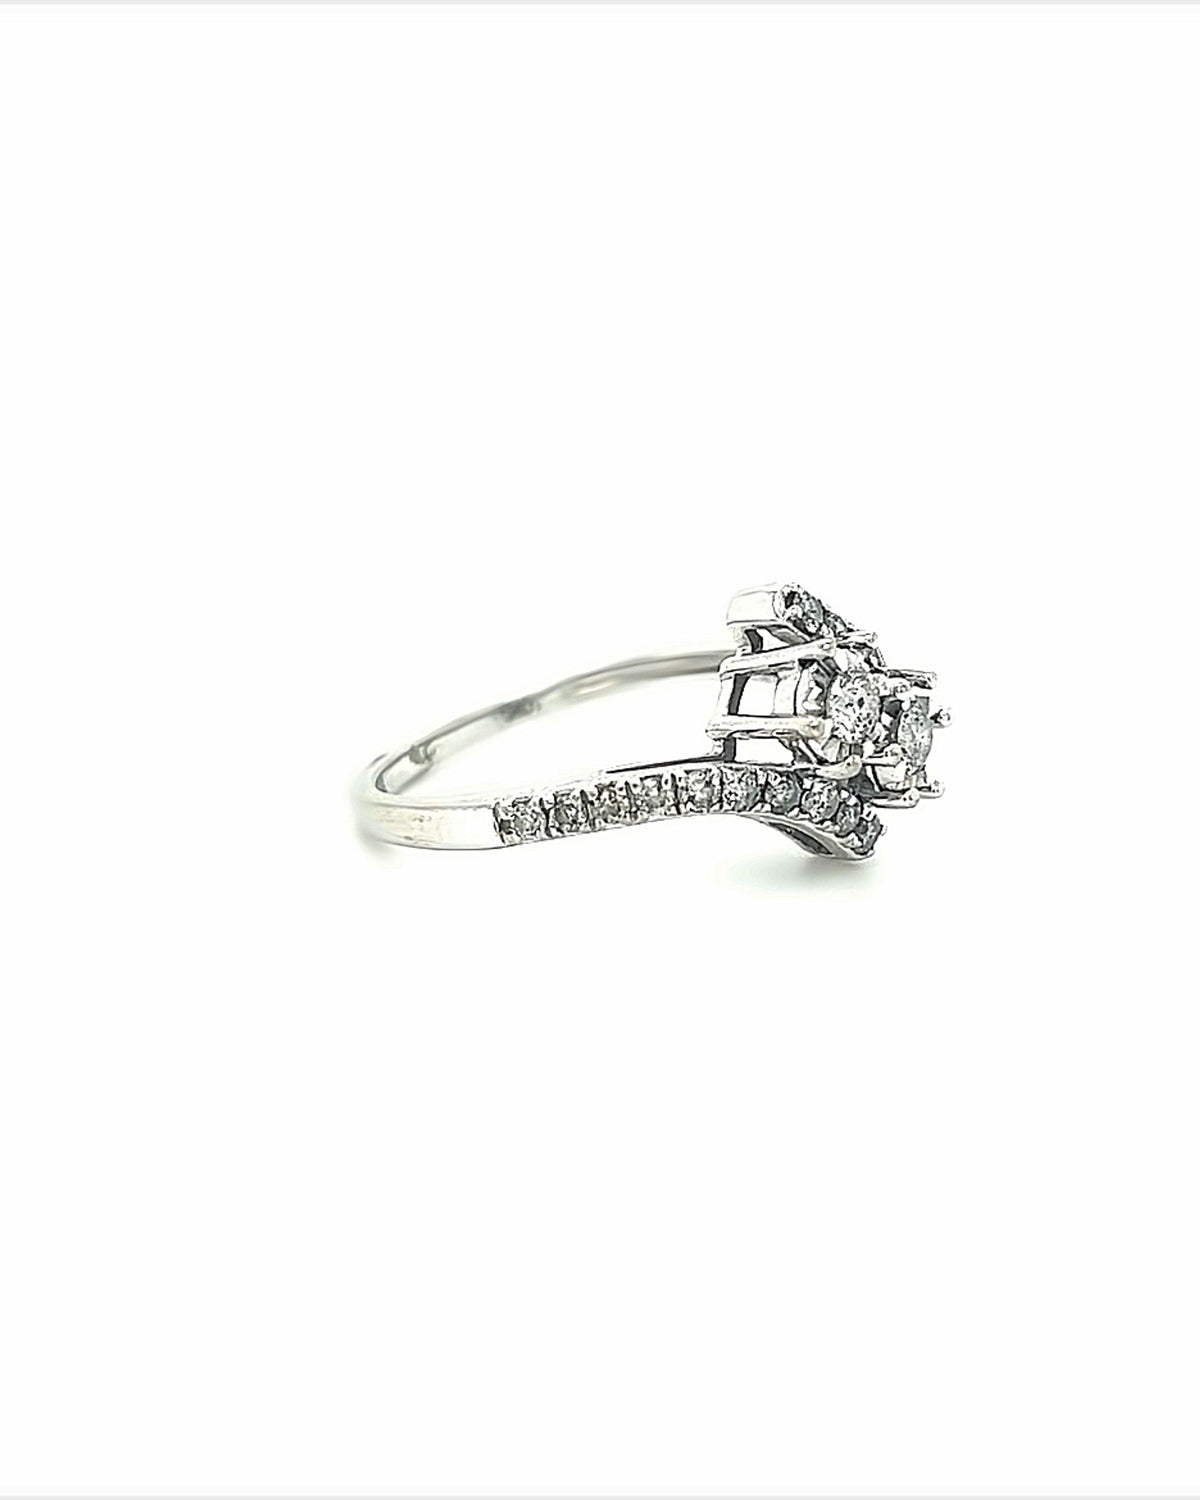 10KT WHITE GOLD FANCY LADIES RING WITH DIAMONDS